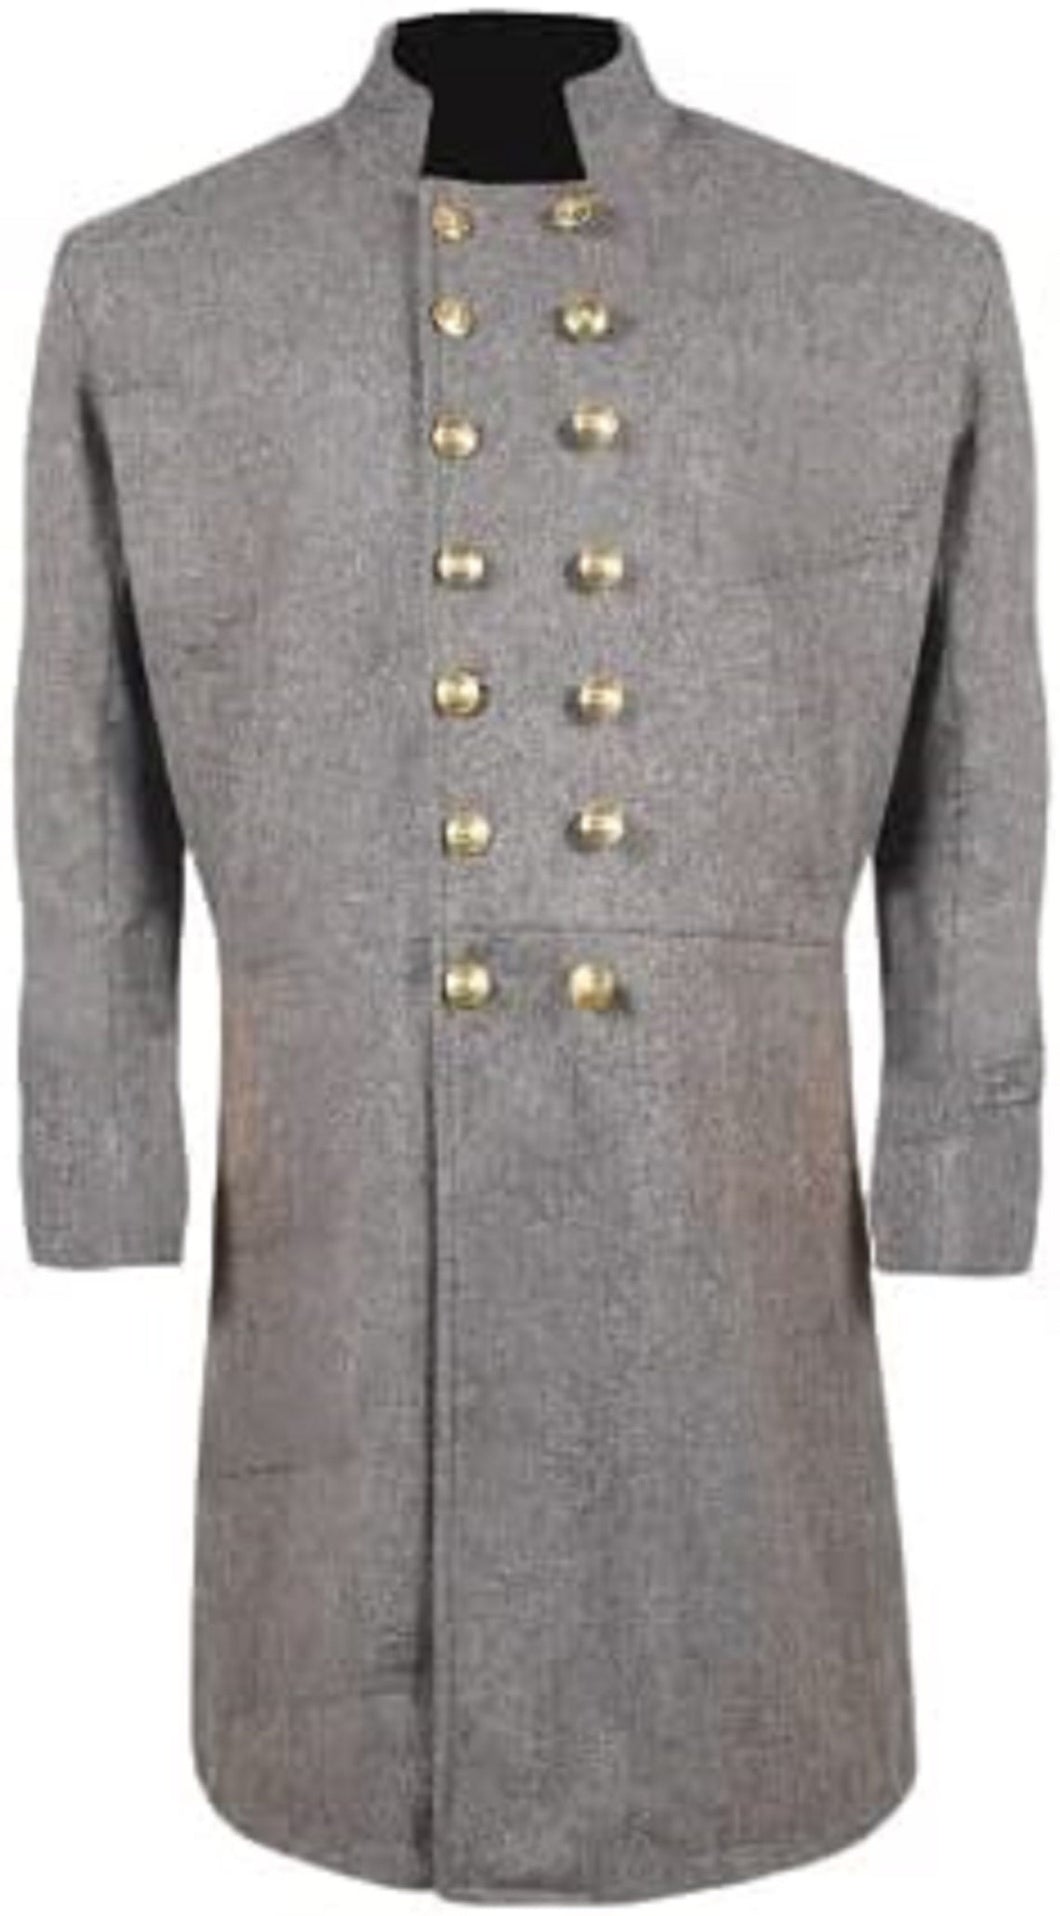 Civil War CS Senior Officer's Double Breasted Grey Wool Frock Coat  Civil War Confederate 1st & 2nd Lieutenant Frock Coat Civil war Union Junior Officer Single Breasted Navy Blue Frock Coat - 